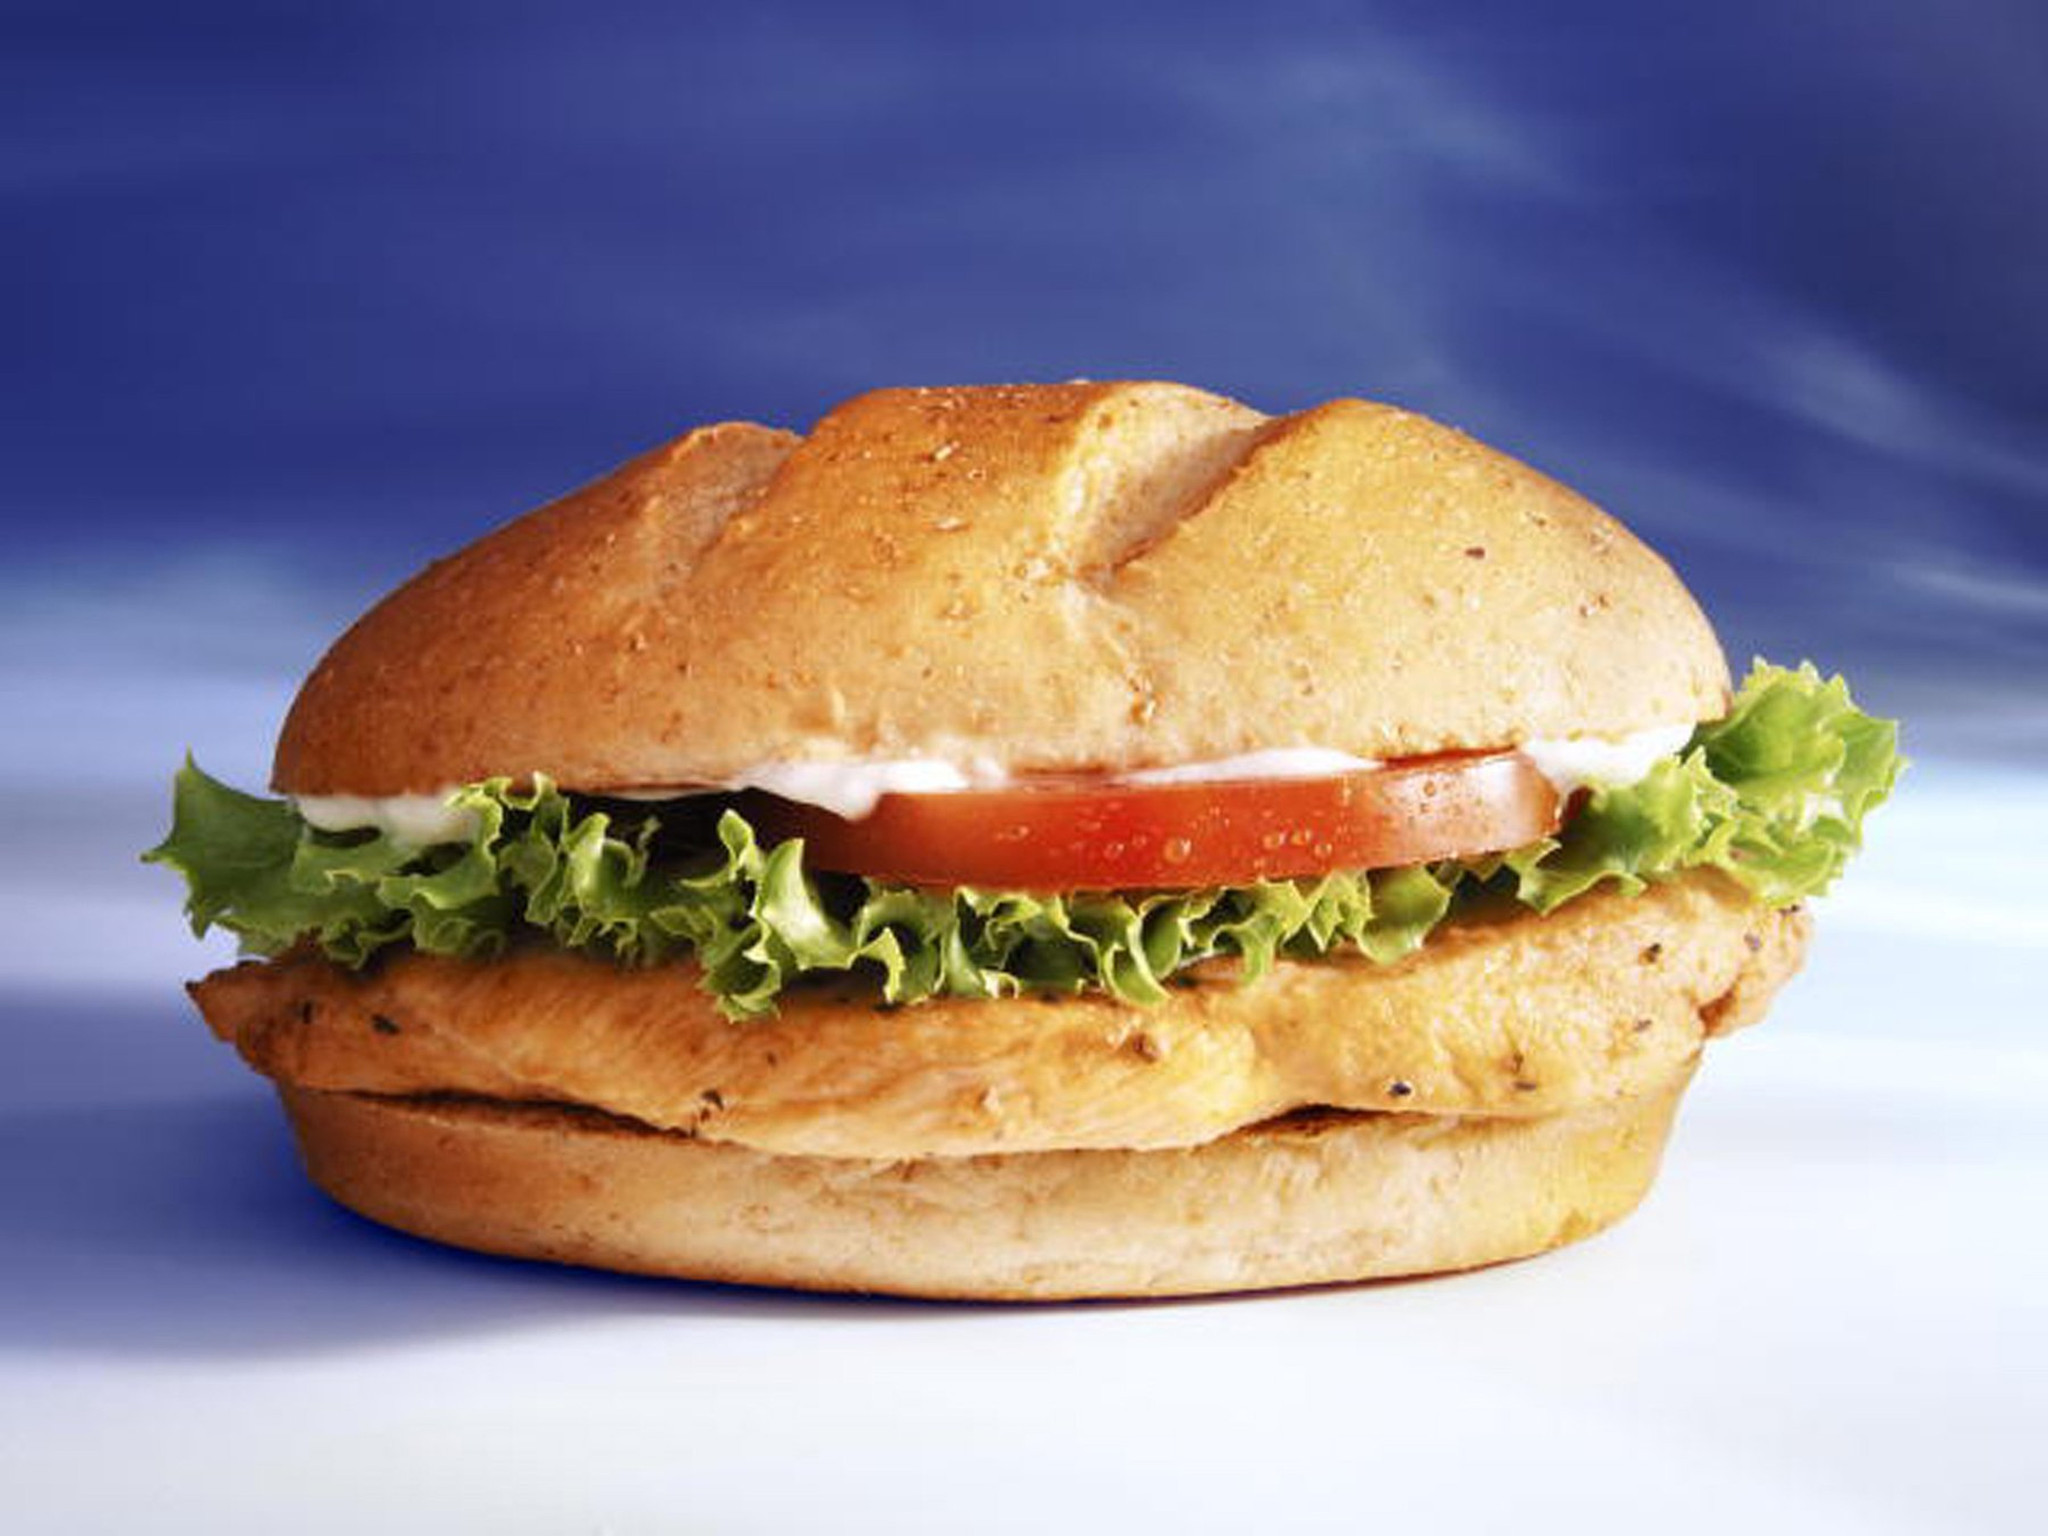 Chicken Sandwiches Mcdonalds
 McDonald s revamps grilled chicken to cut ingre nts